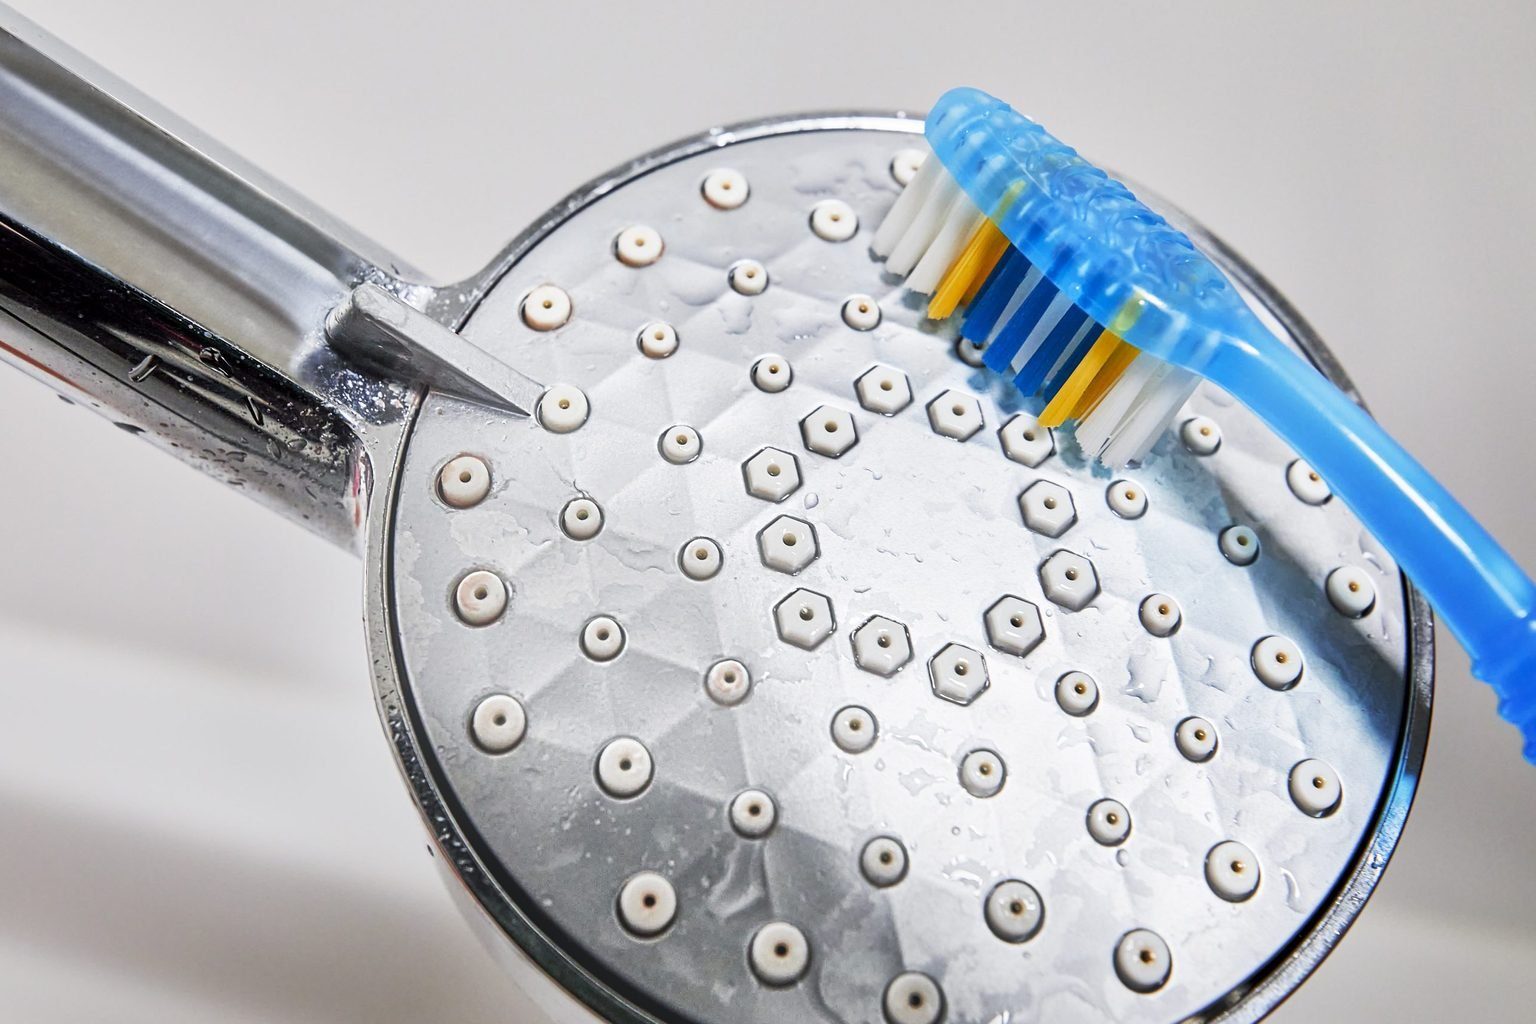  How to Clean a Showerhead Without Removing It